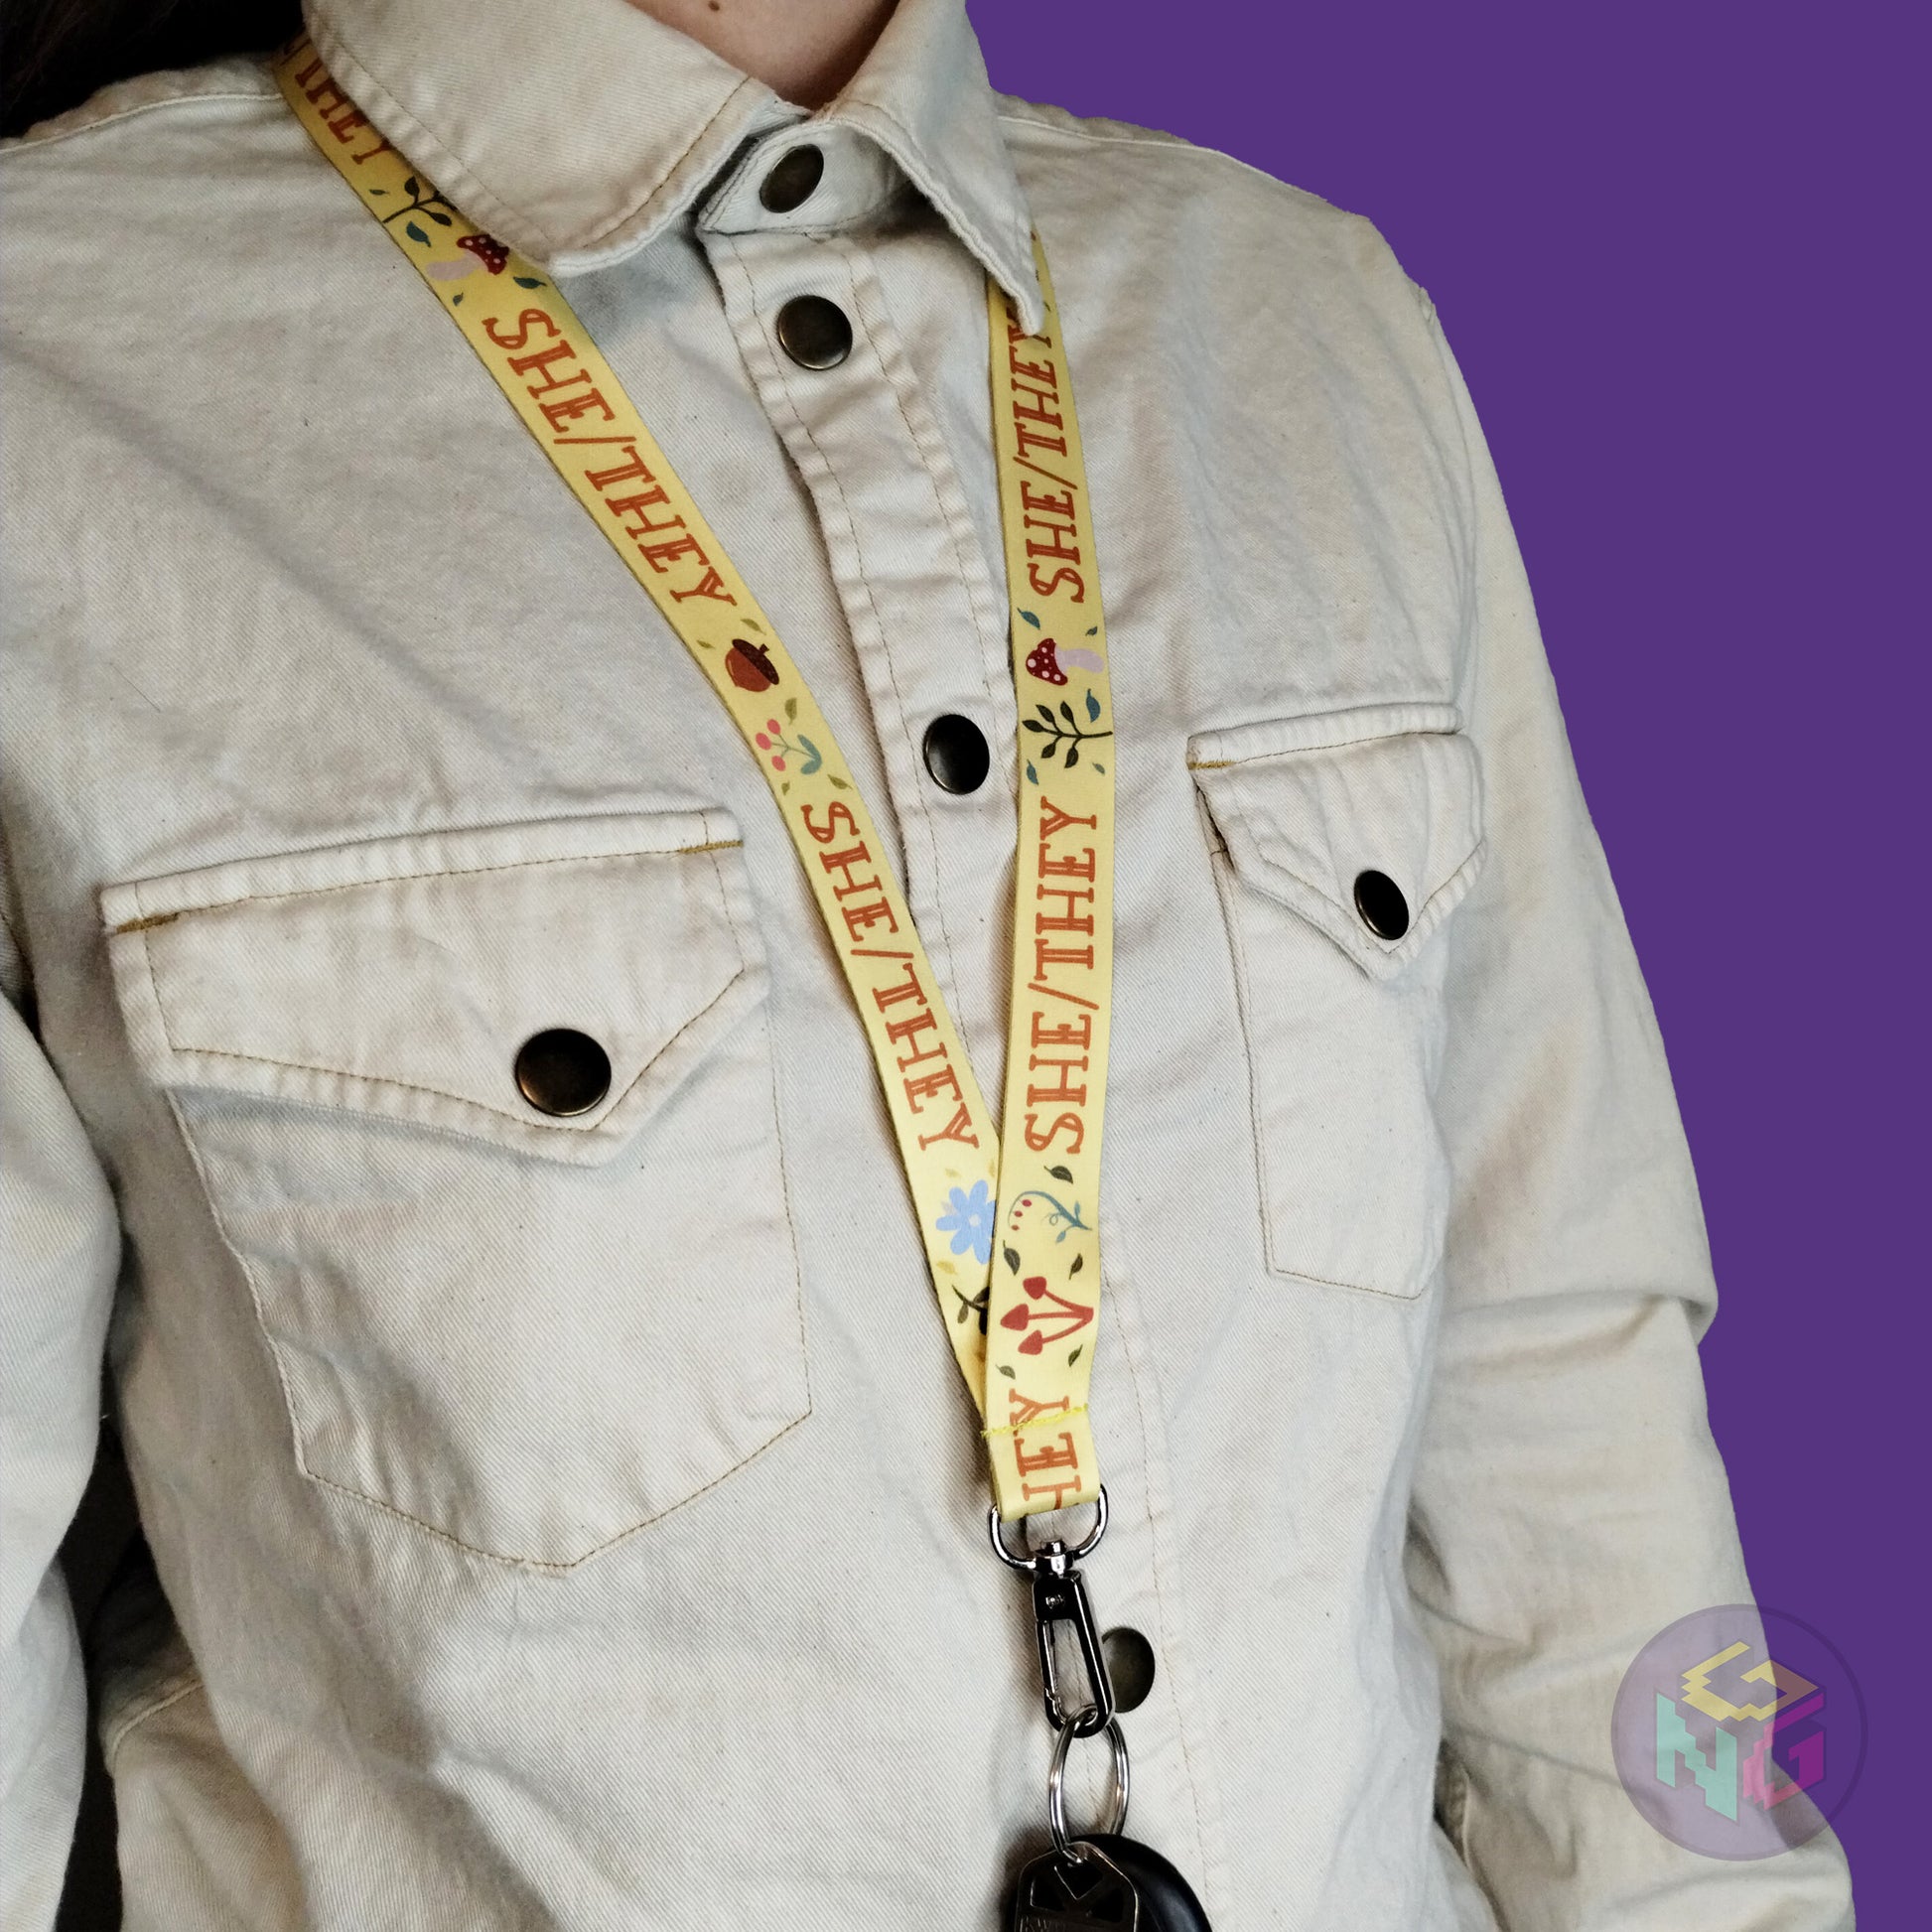 yellow she they mushroom lanyard being worn by a flat chested person wearing a cream button up. The end of the lanyard falls between their sternum and bellybutton and has a key fob clipped to the end